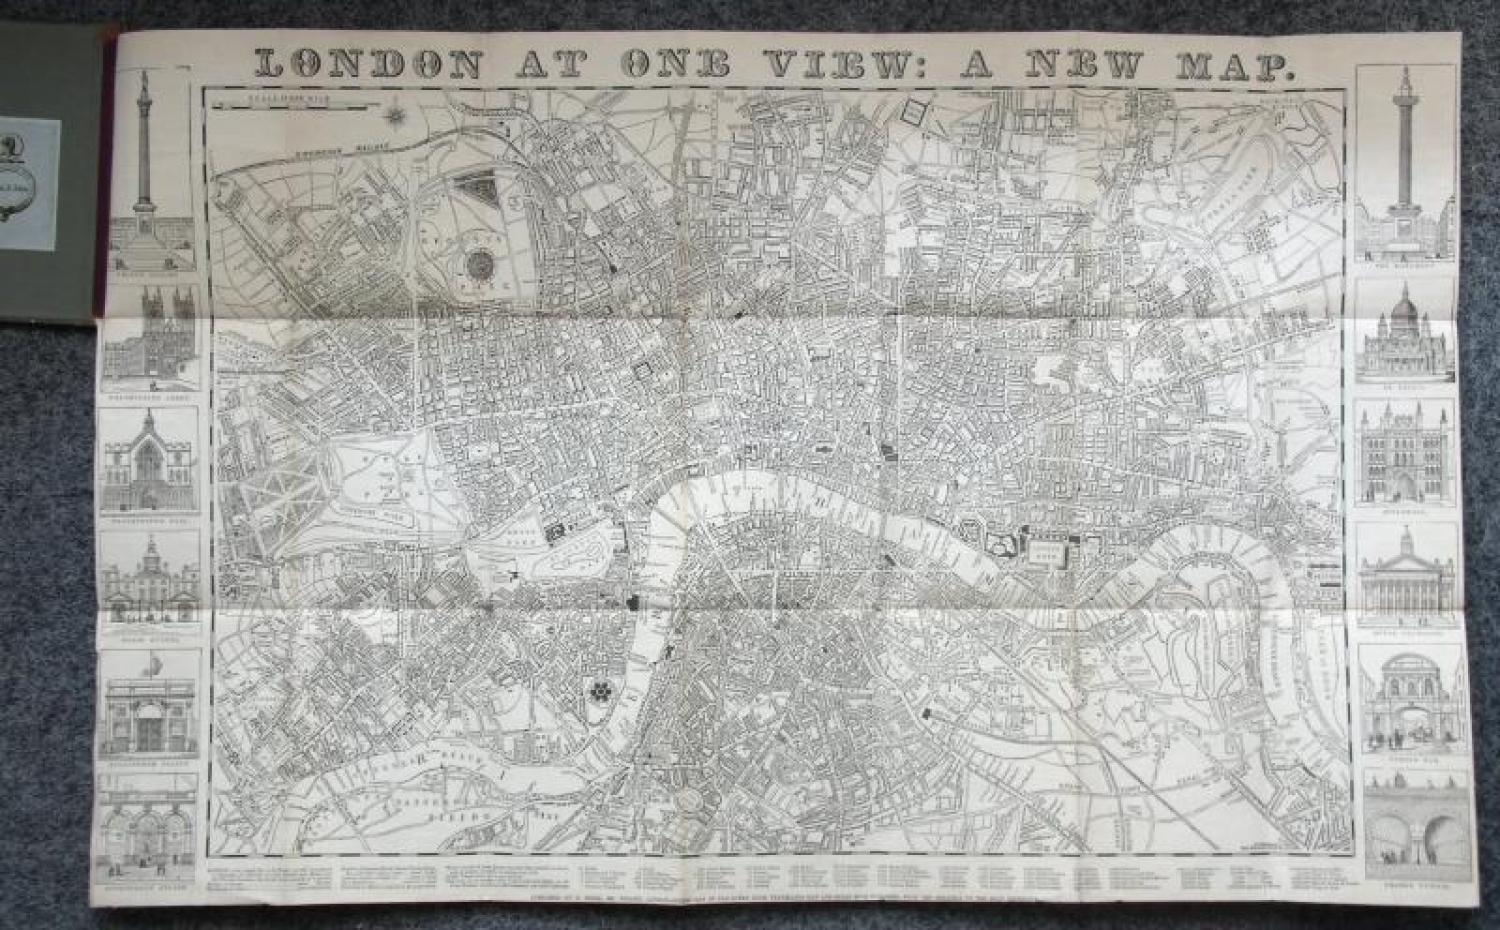 Biggs - London At One View: A New Map